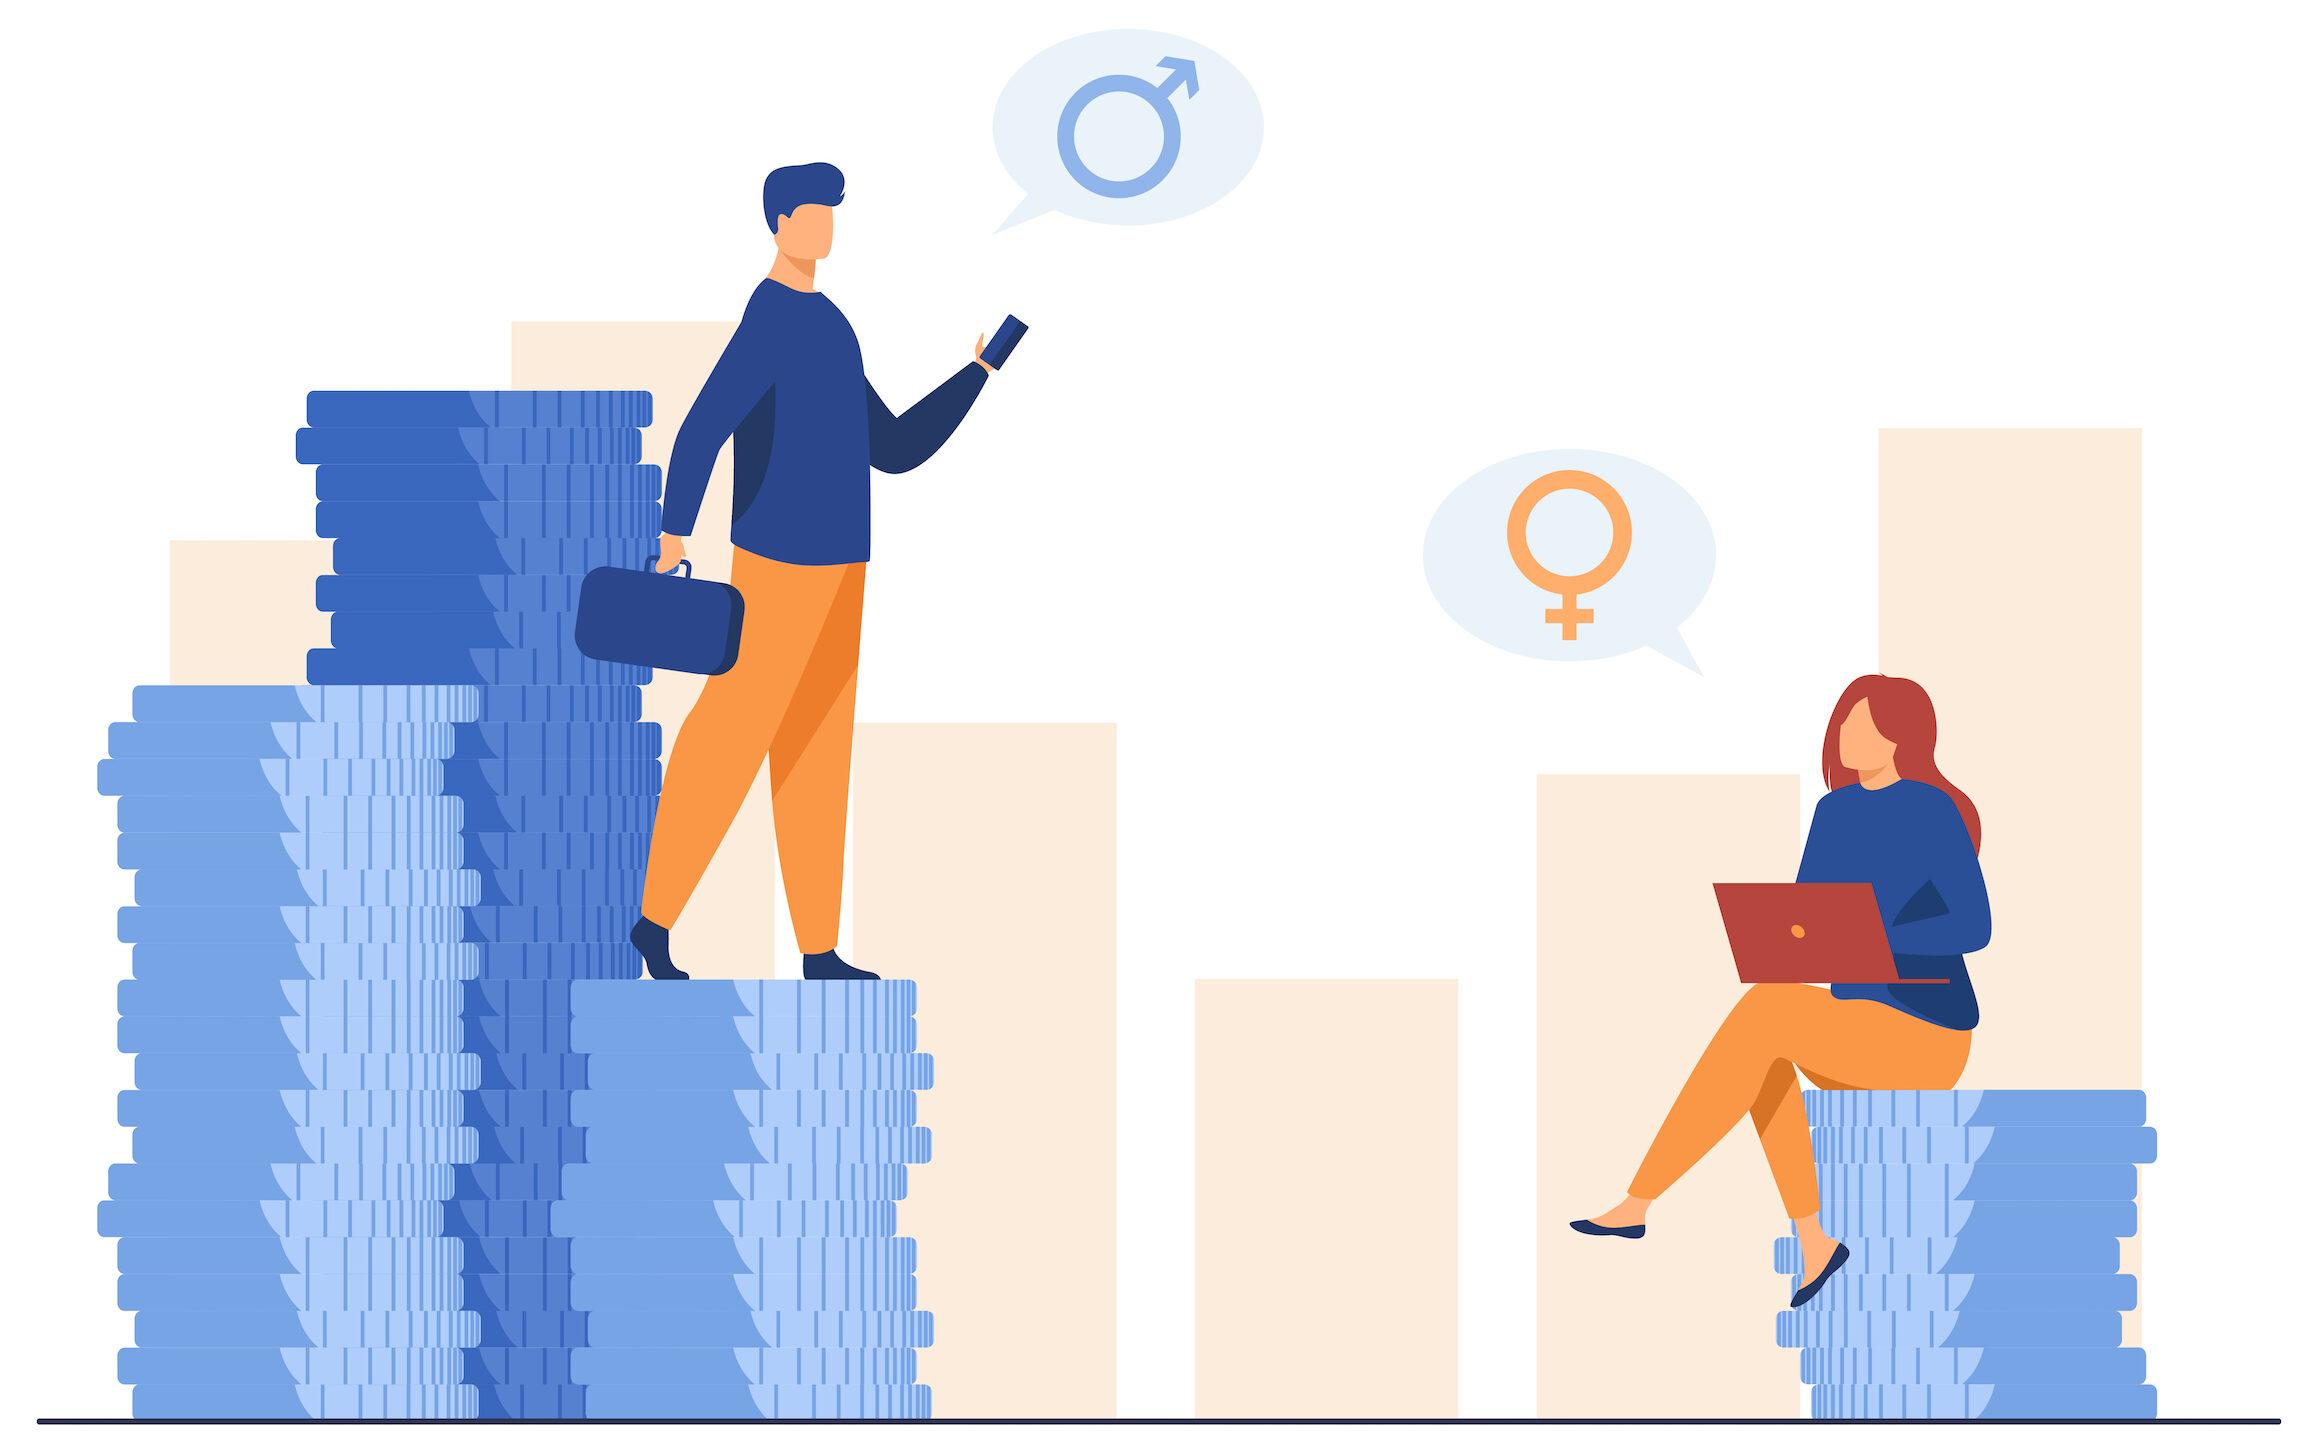 Earnings gender discrimination. Man and woman getting different salary. Flat vector illustration.